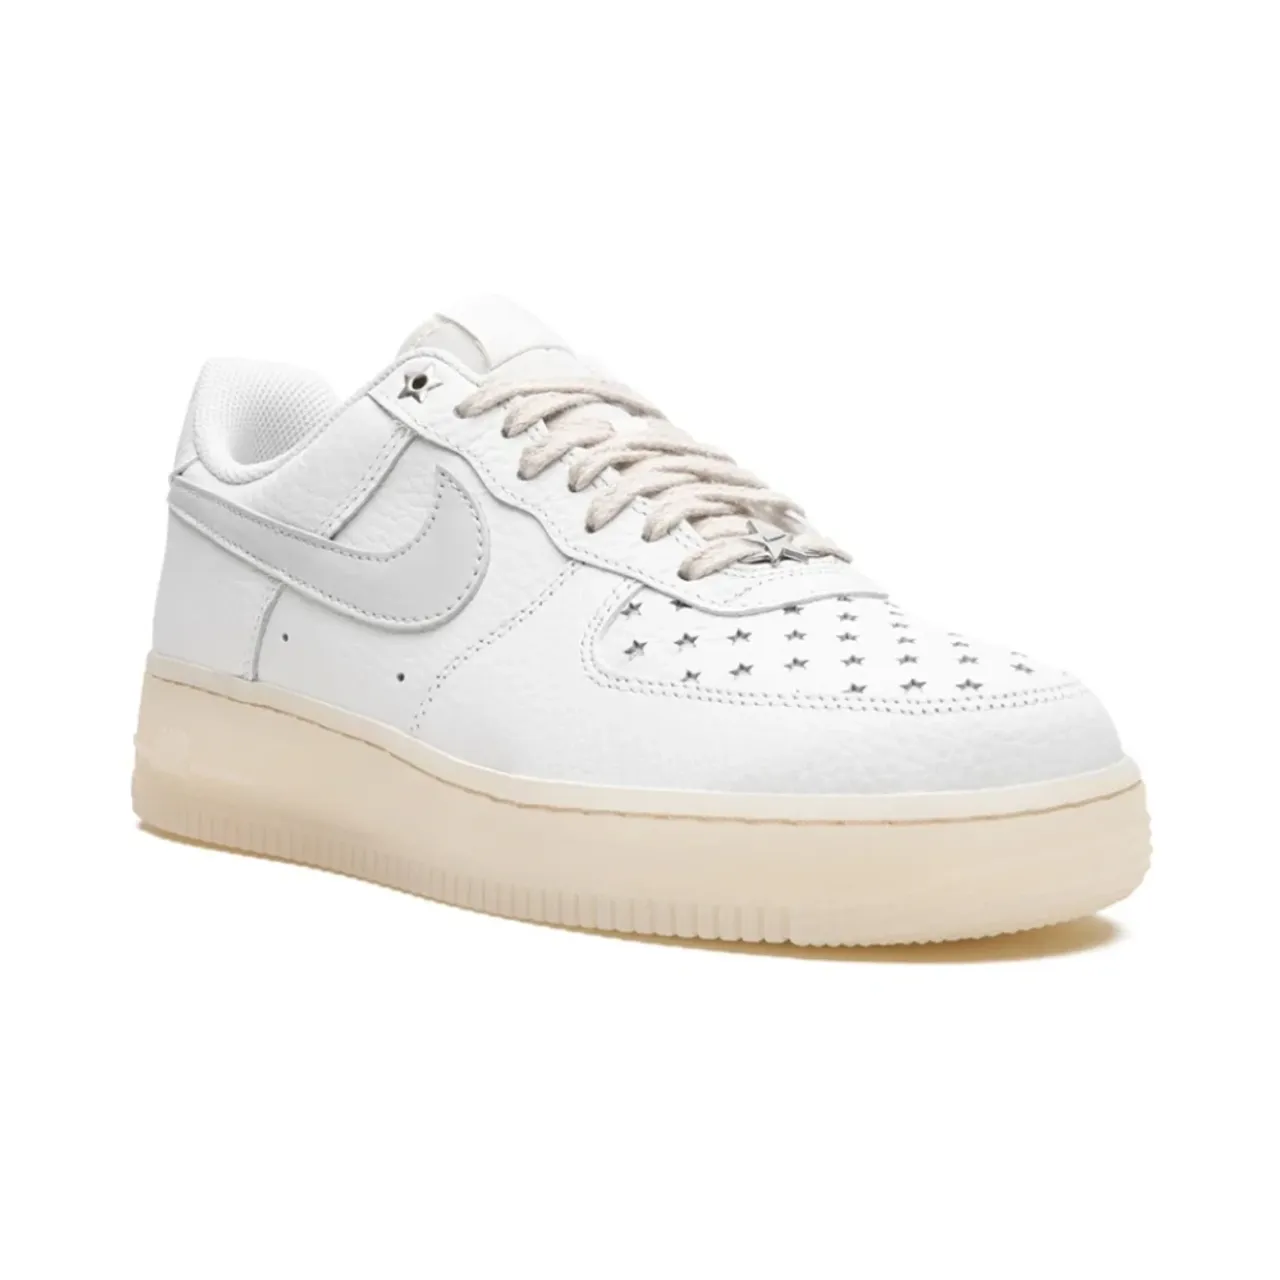 Nike , Air Force 1 07 Sneakers ,White female, Sizes: